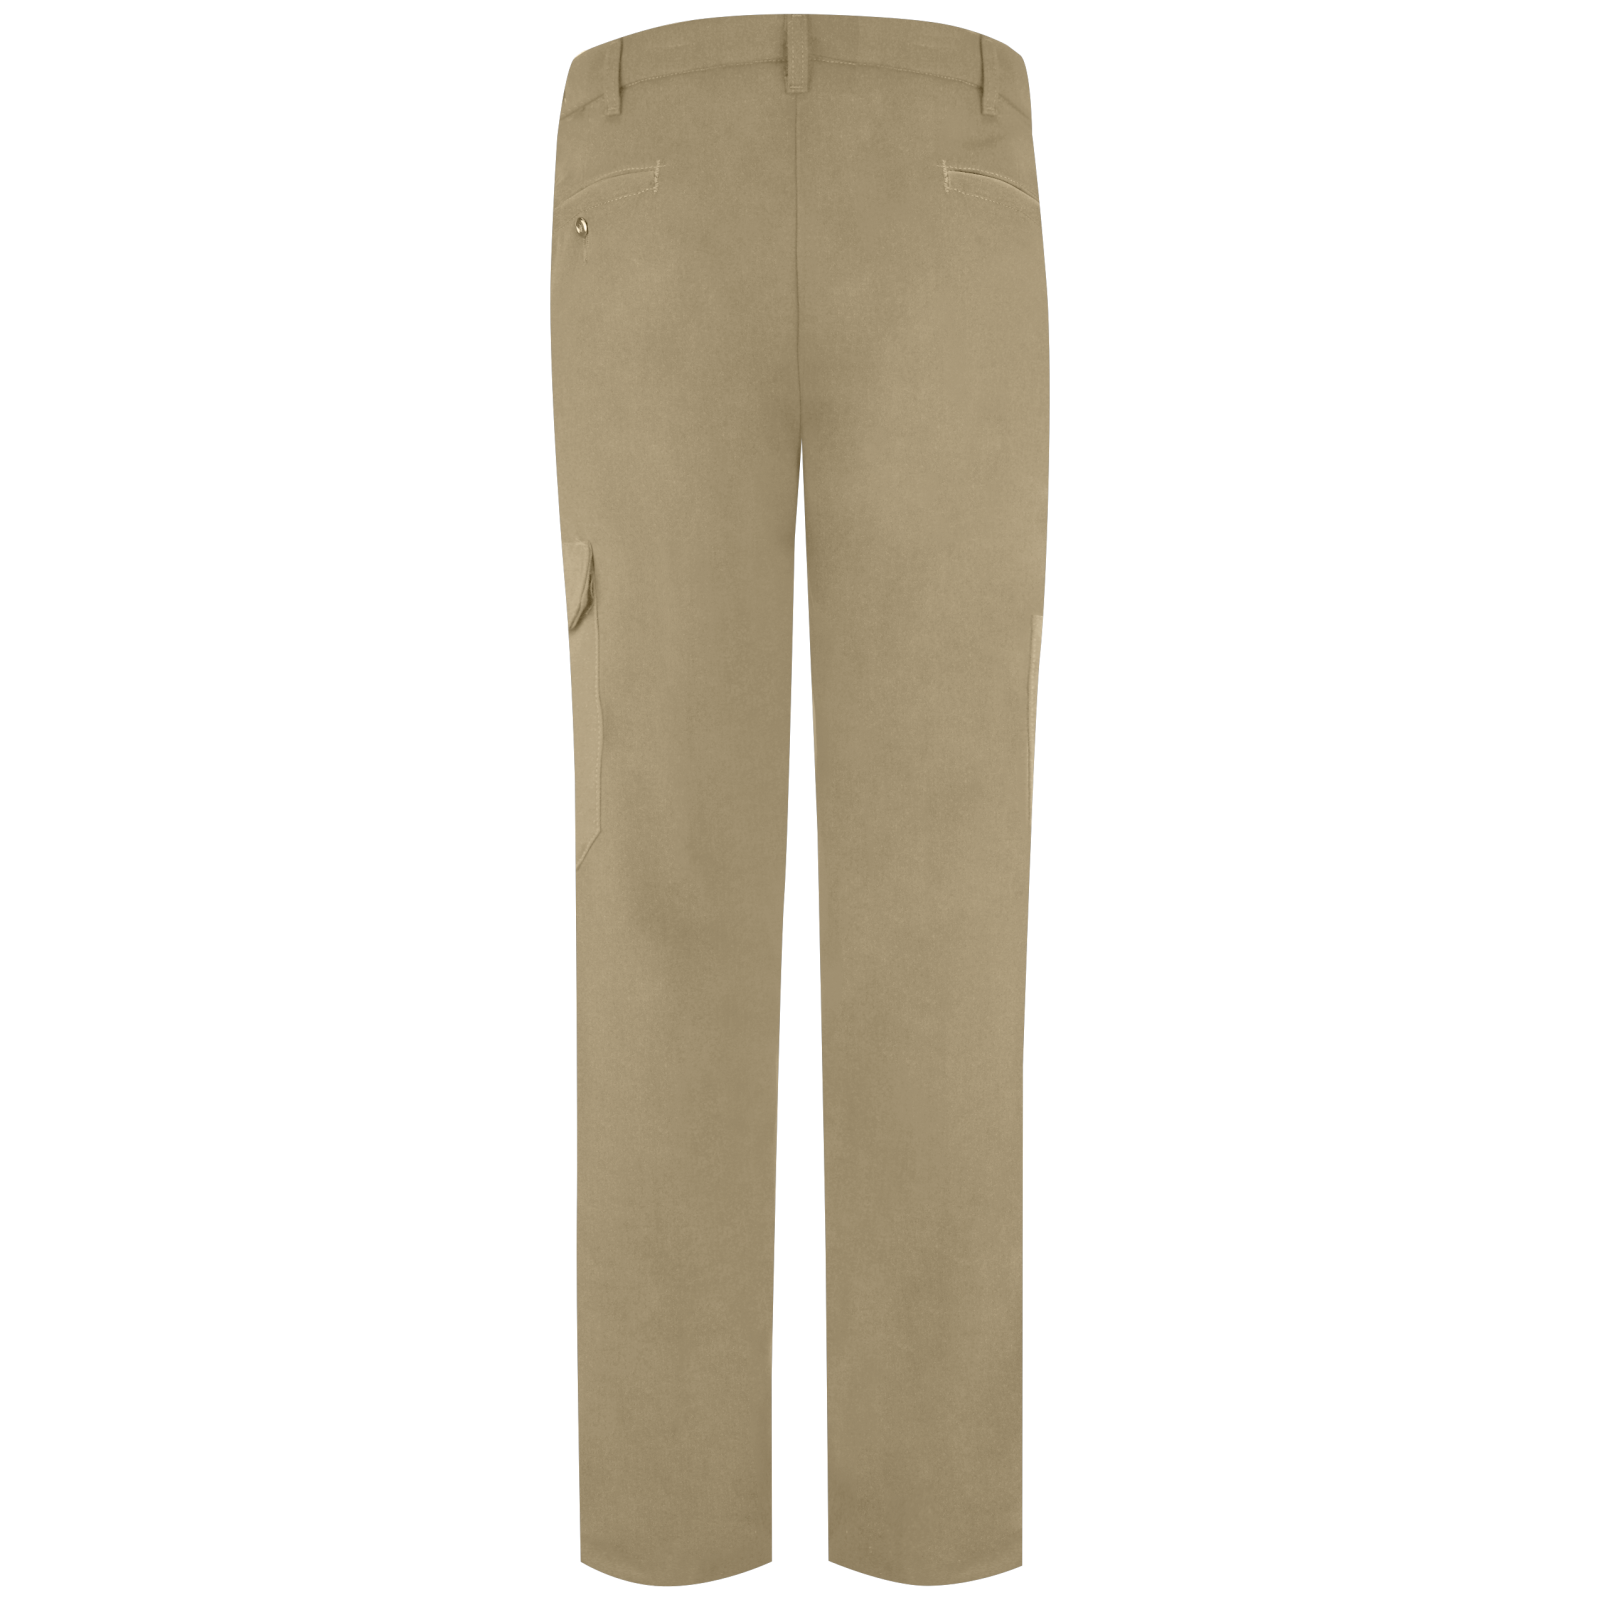 Amazon.com : MIER Men's Outdoor Hiking Pants Stretch Ripstop Nylon Travel Pants  Lightweight, Quick Dry, Water Resistance, Army Green, 30 : Clothing, Shoes  & Jewelry